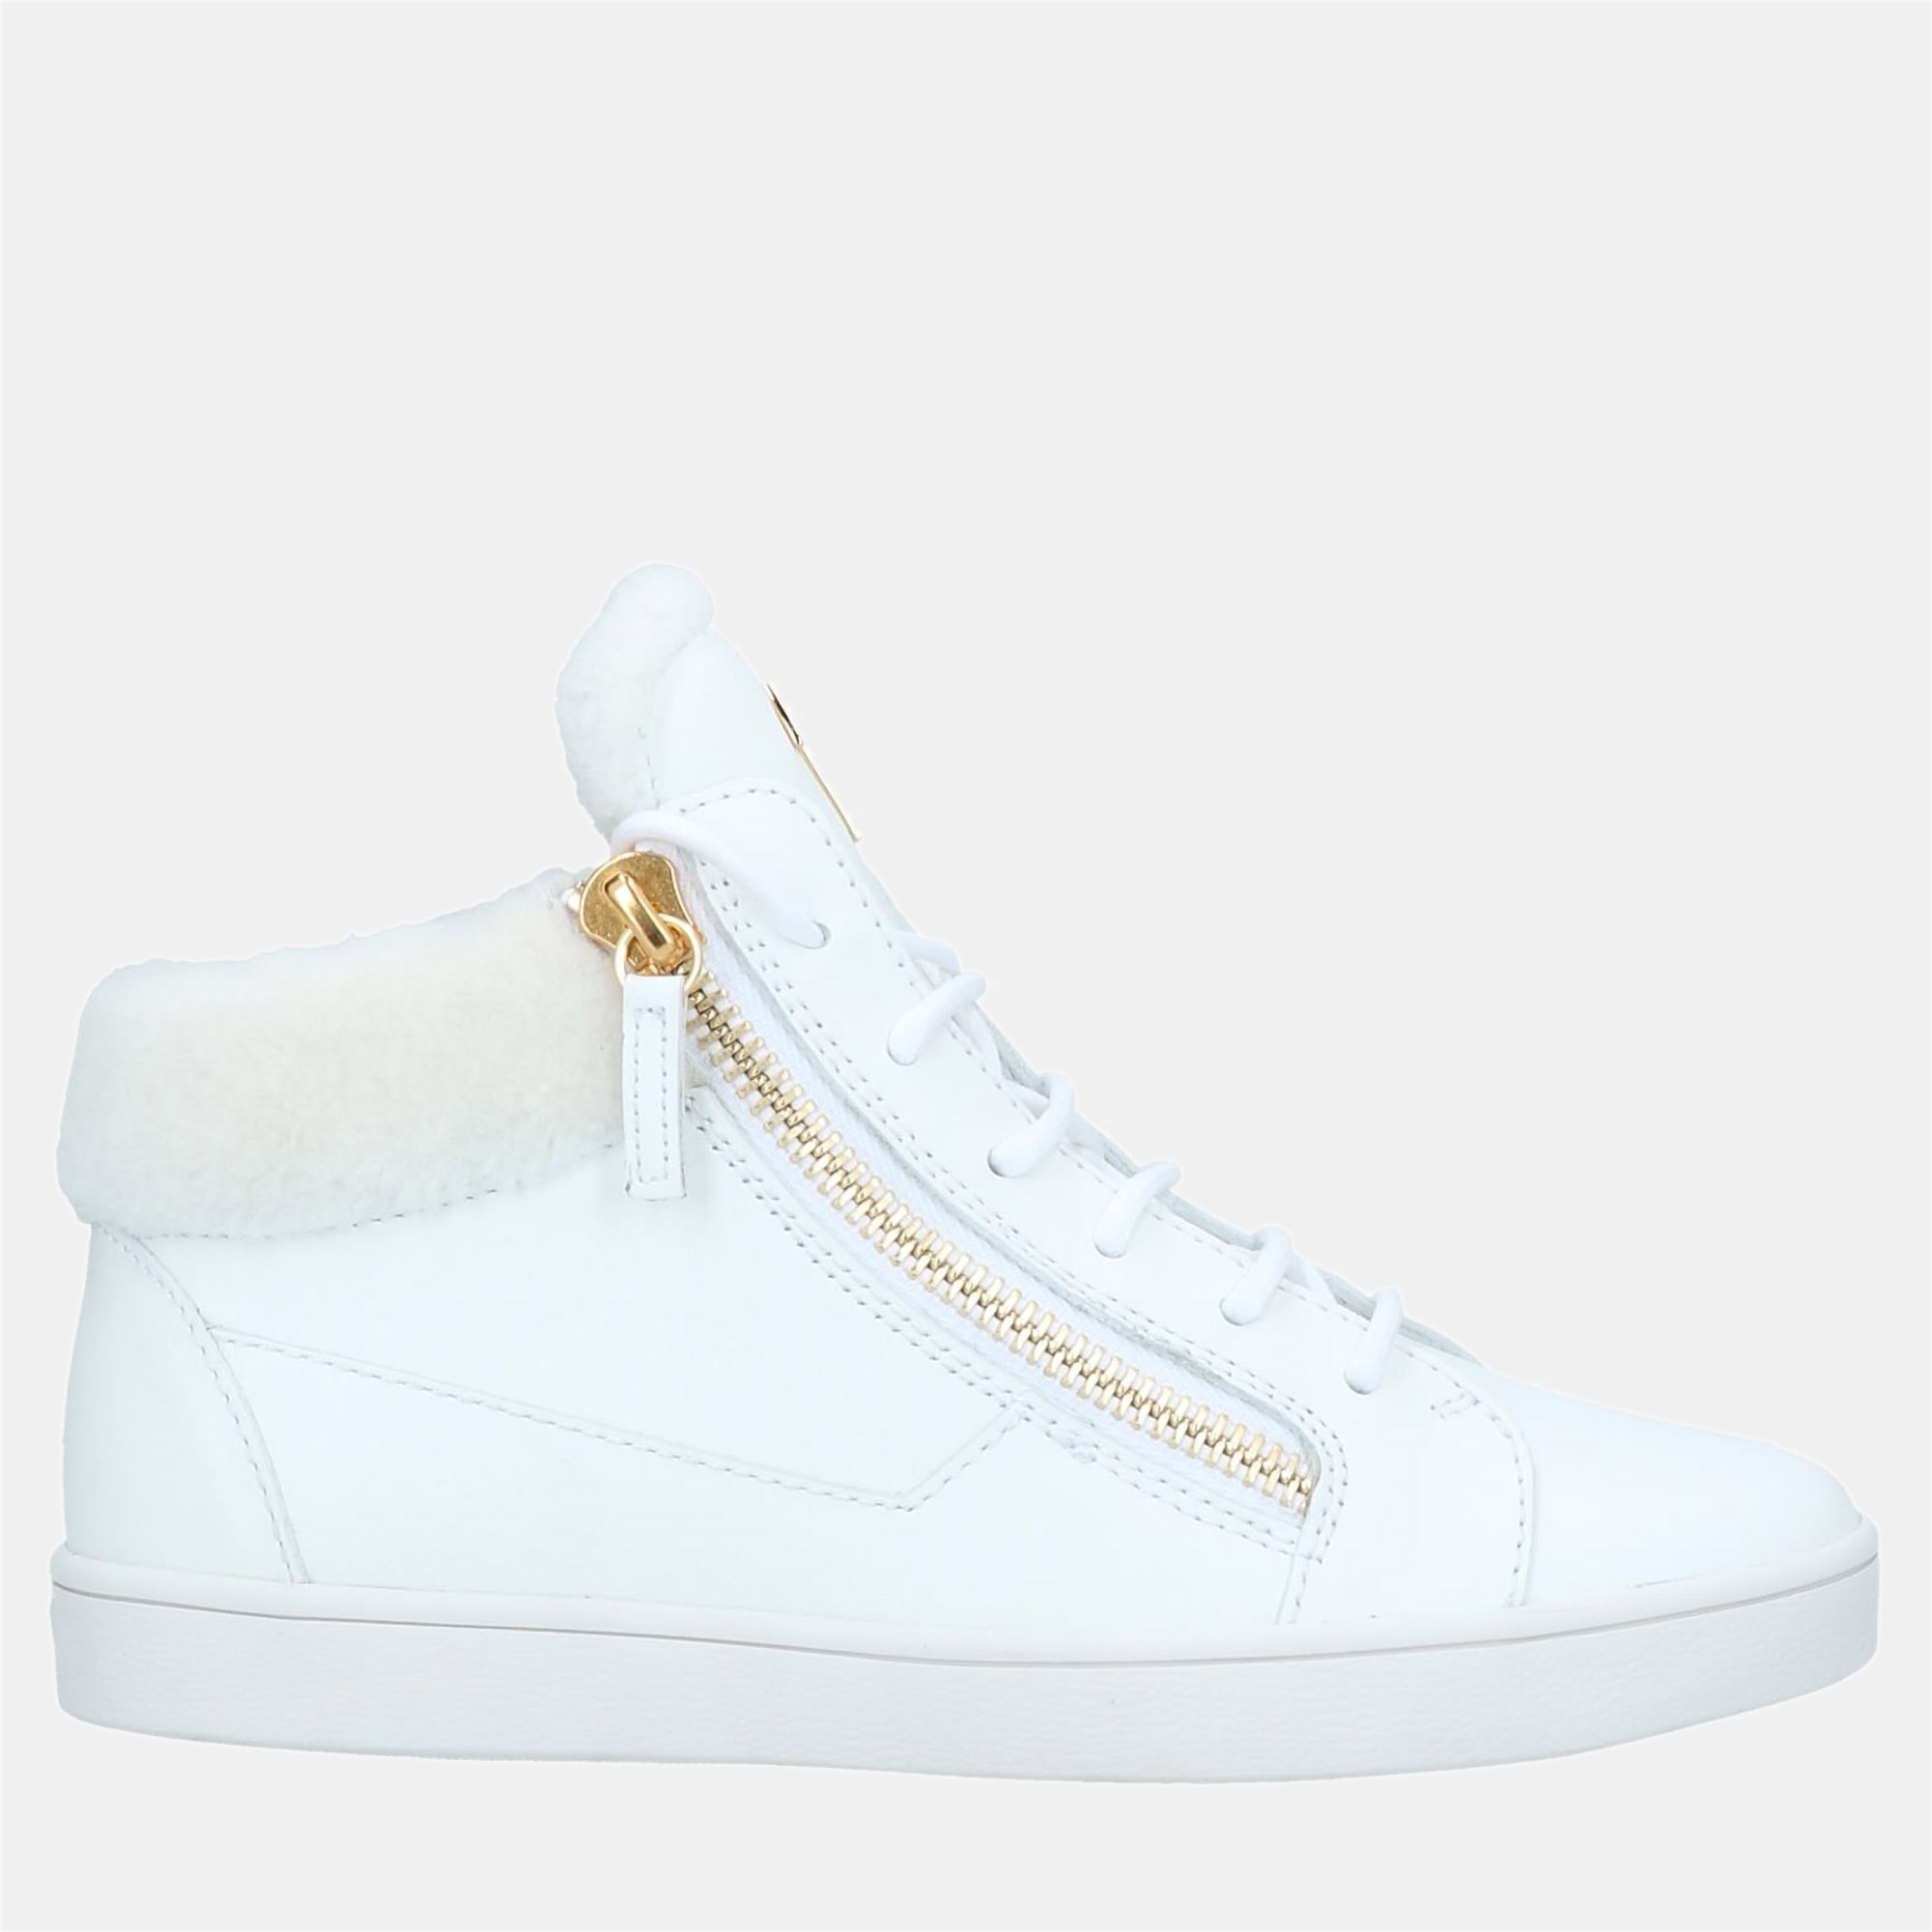 Pre-owned Giuseppe Zanotti Leather And Shearling Sneakers Size 37 In White